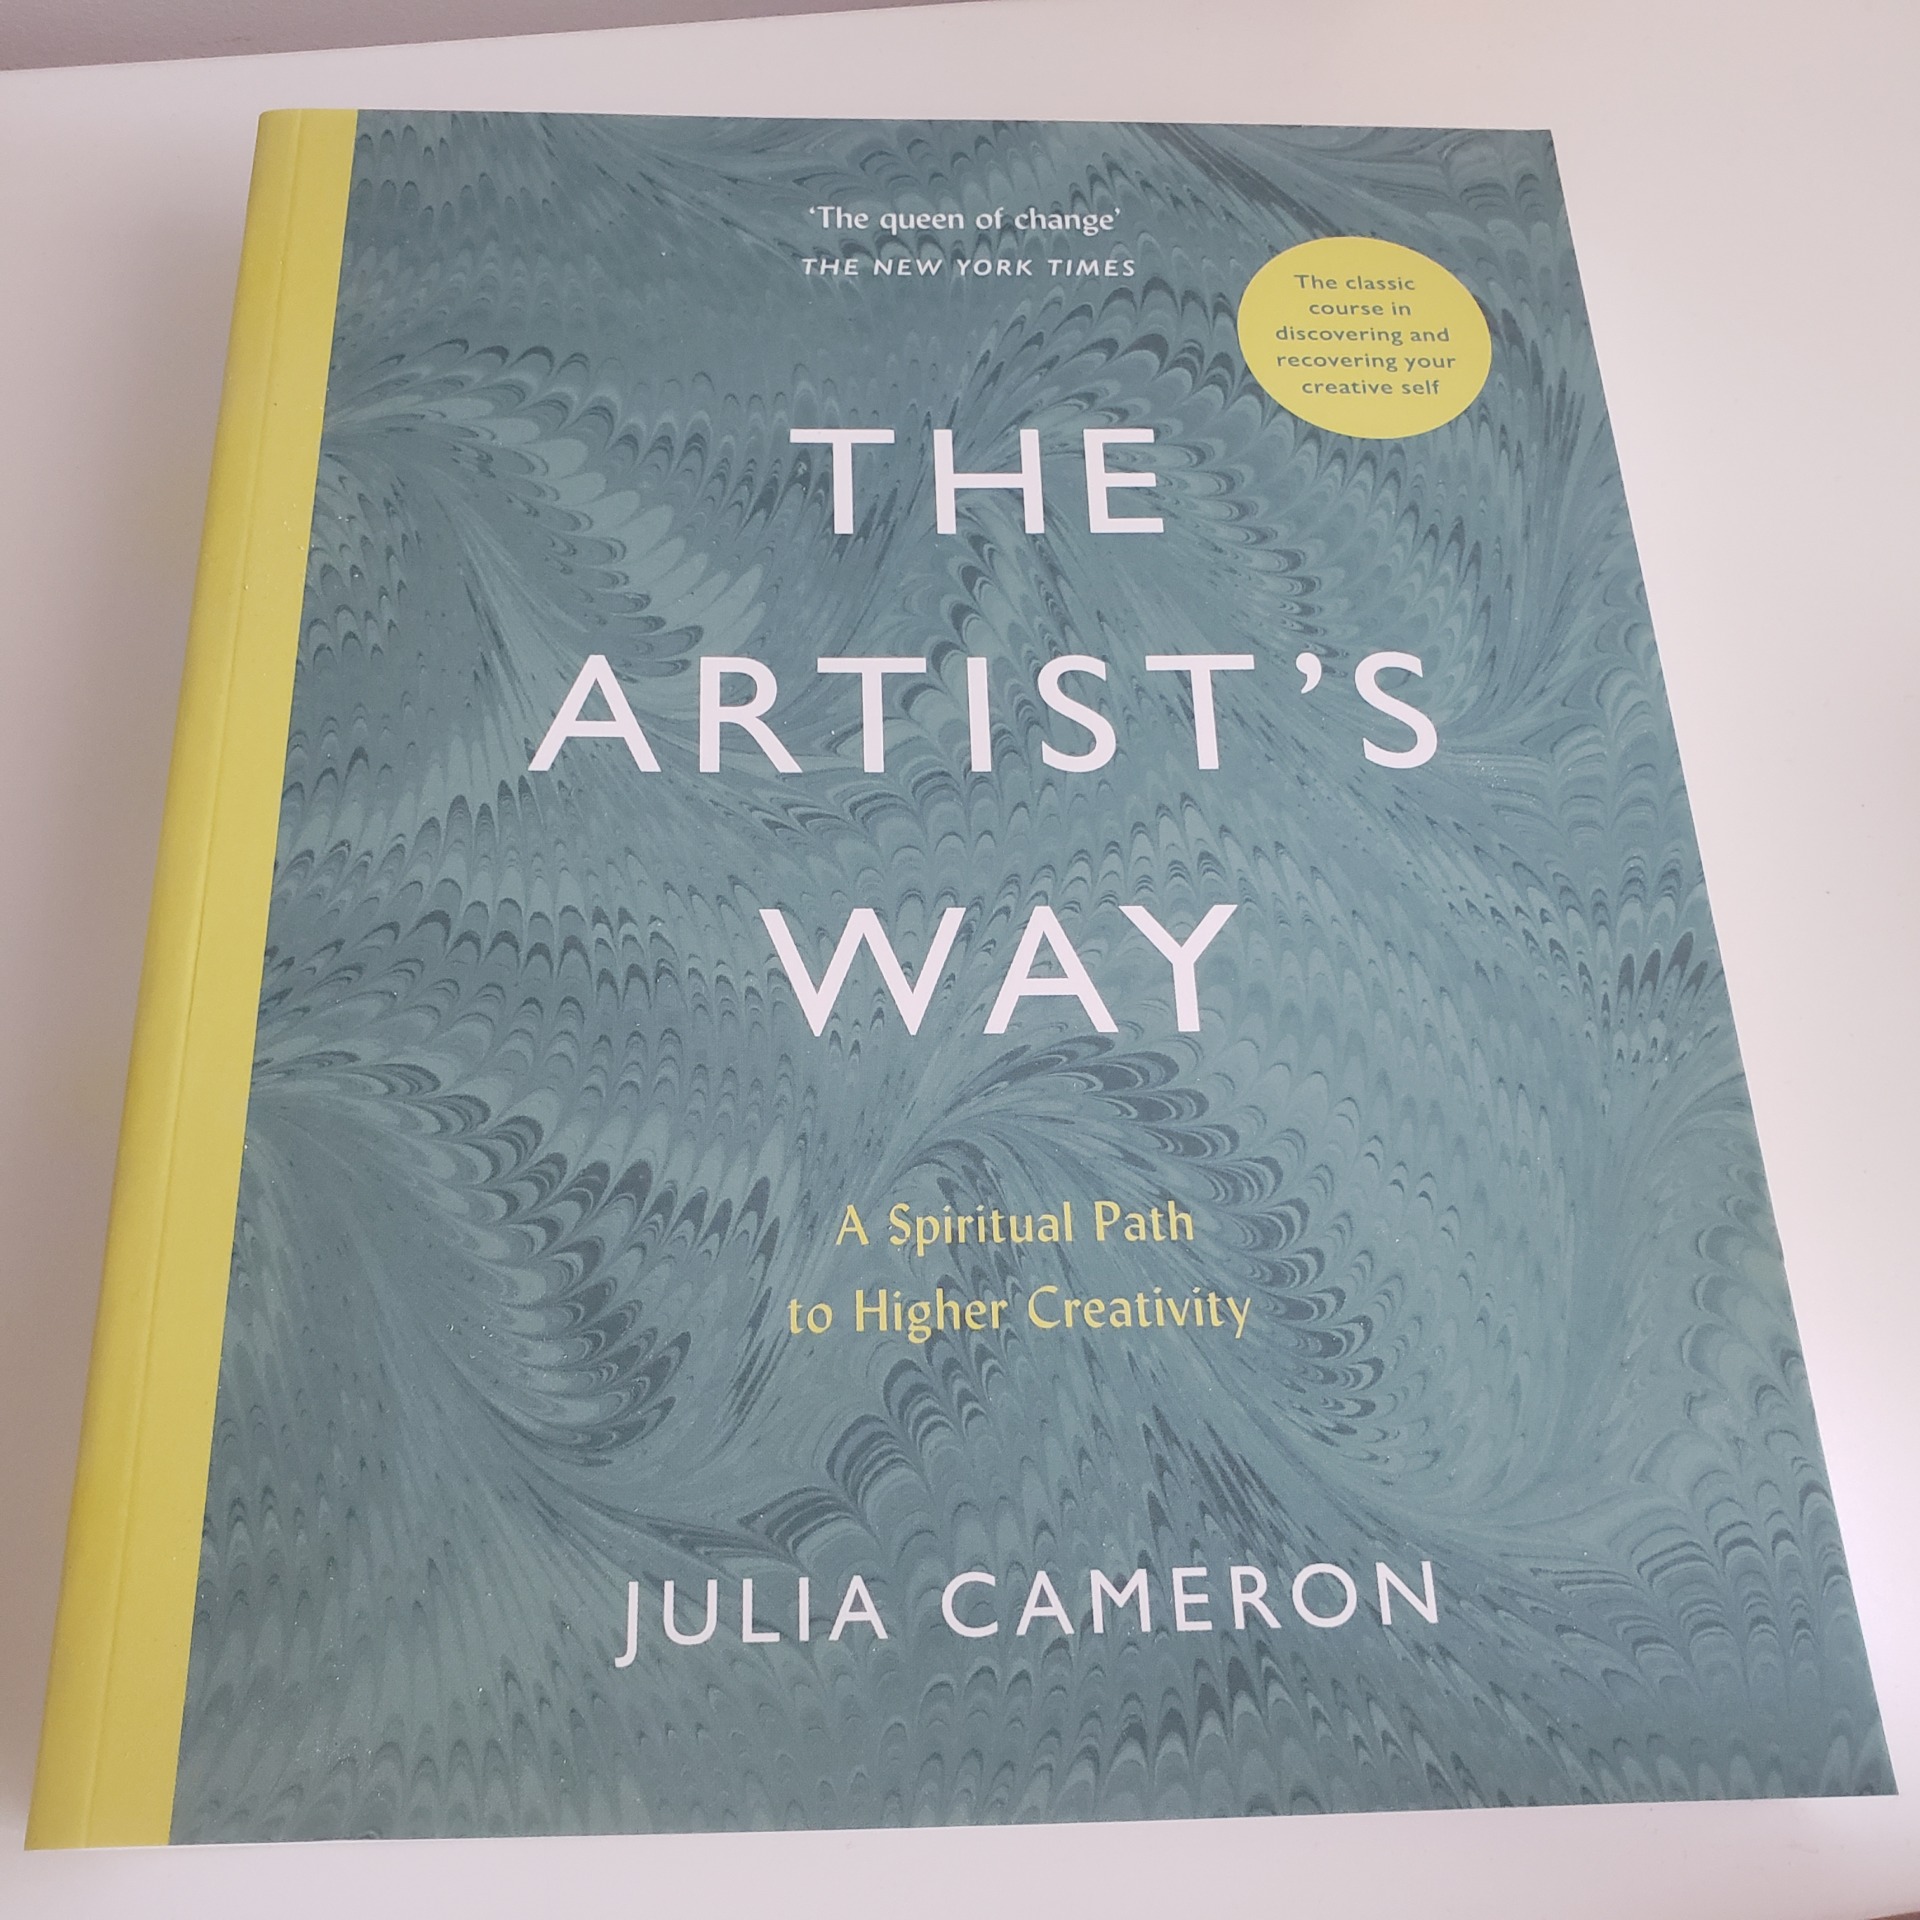 With More Than 5 Million Copies Sold, The Artist's Way Continues to Change  Lives. Author Julia